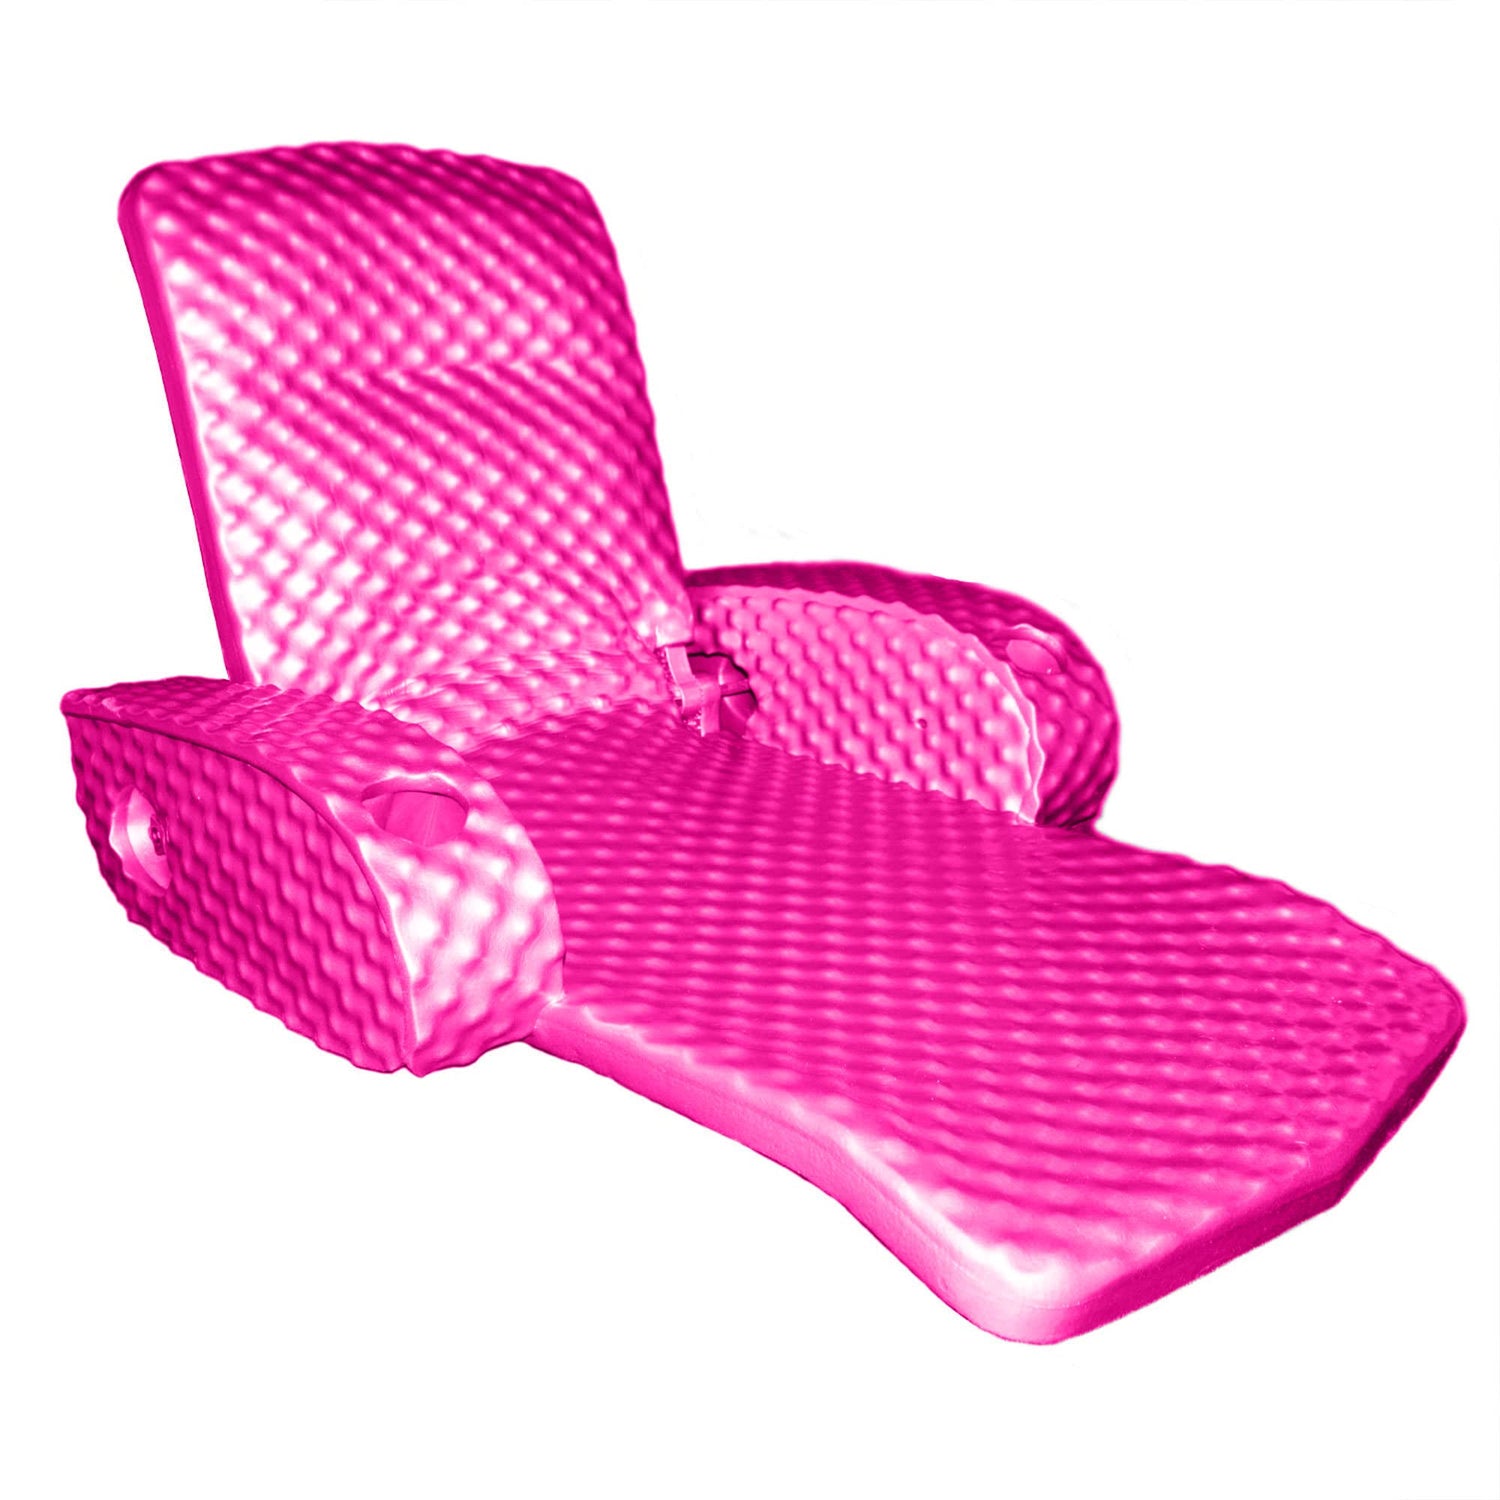 TRC Recreation Super Soft Portable Floating Swimming Pool Water Lounger Comfortable Adjustable Recliner Chair with 2 Cup Holders, Flamingo Pink